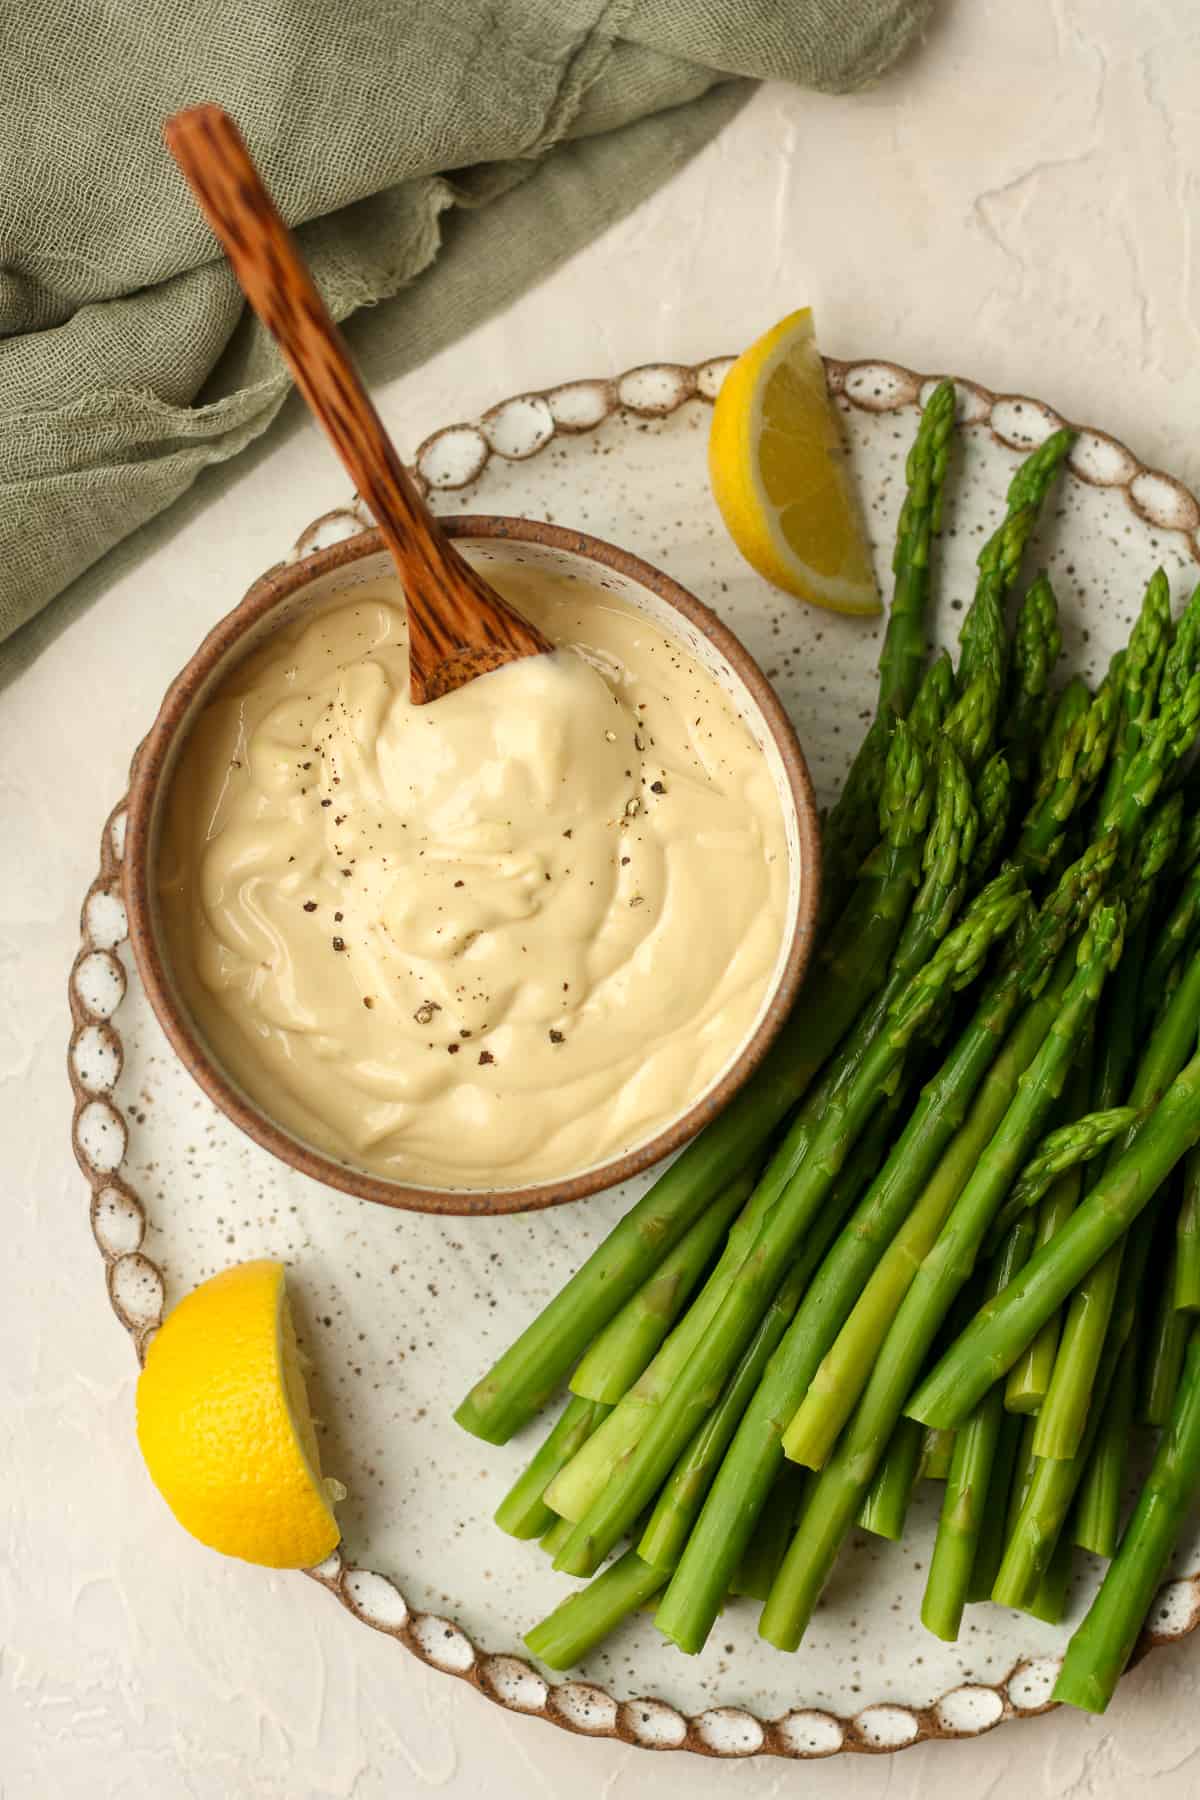 Overhead view of a plate of blanched asparagus with a bowl of wasabi aioli.